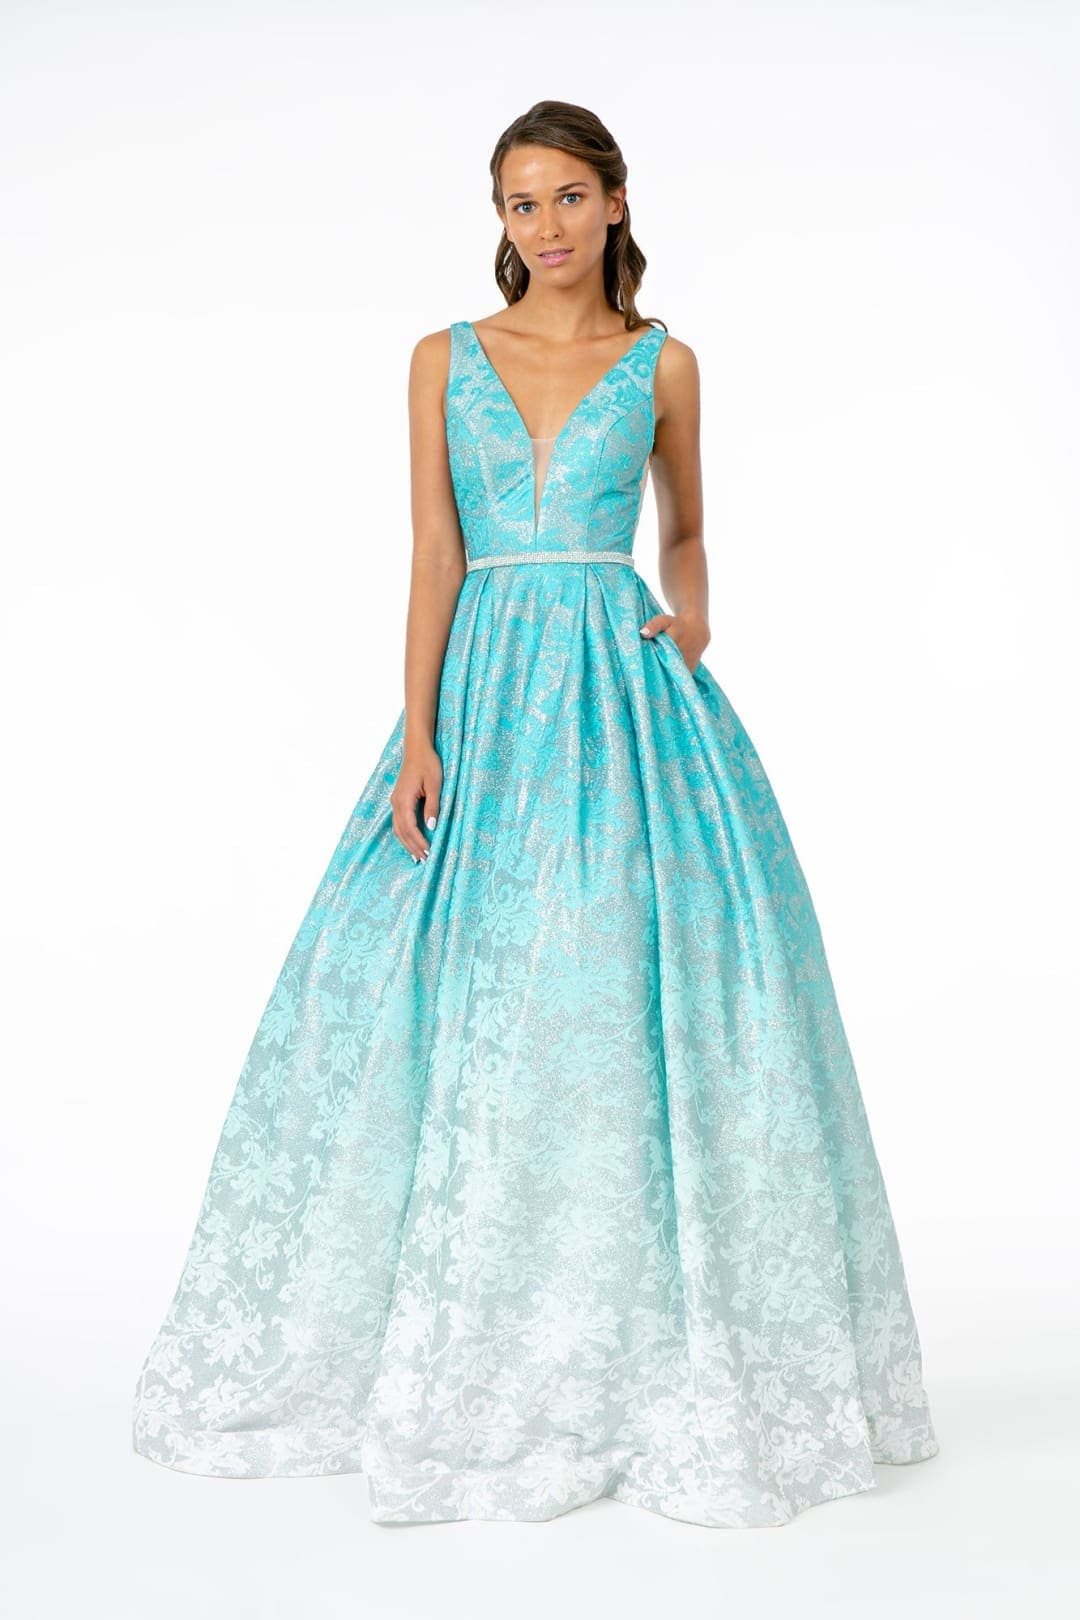 Pageant Formal Evening Gown - LAS2897 - MINT / XS